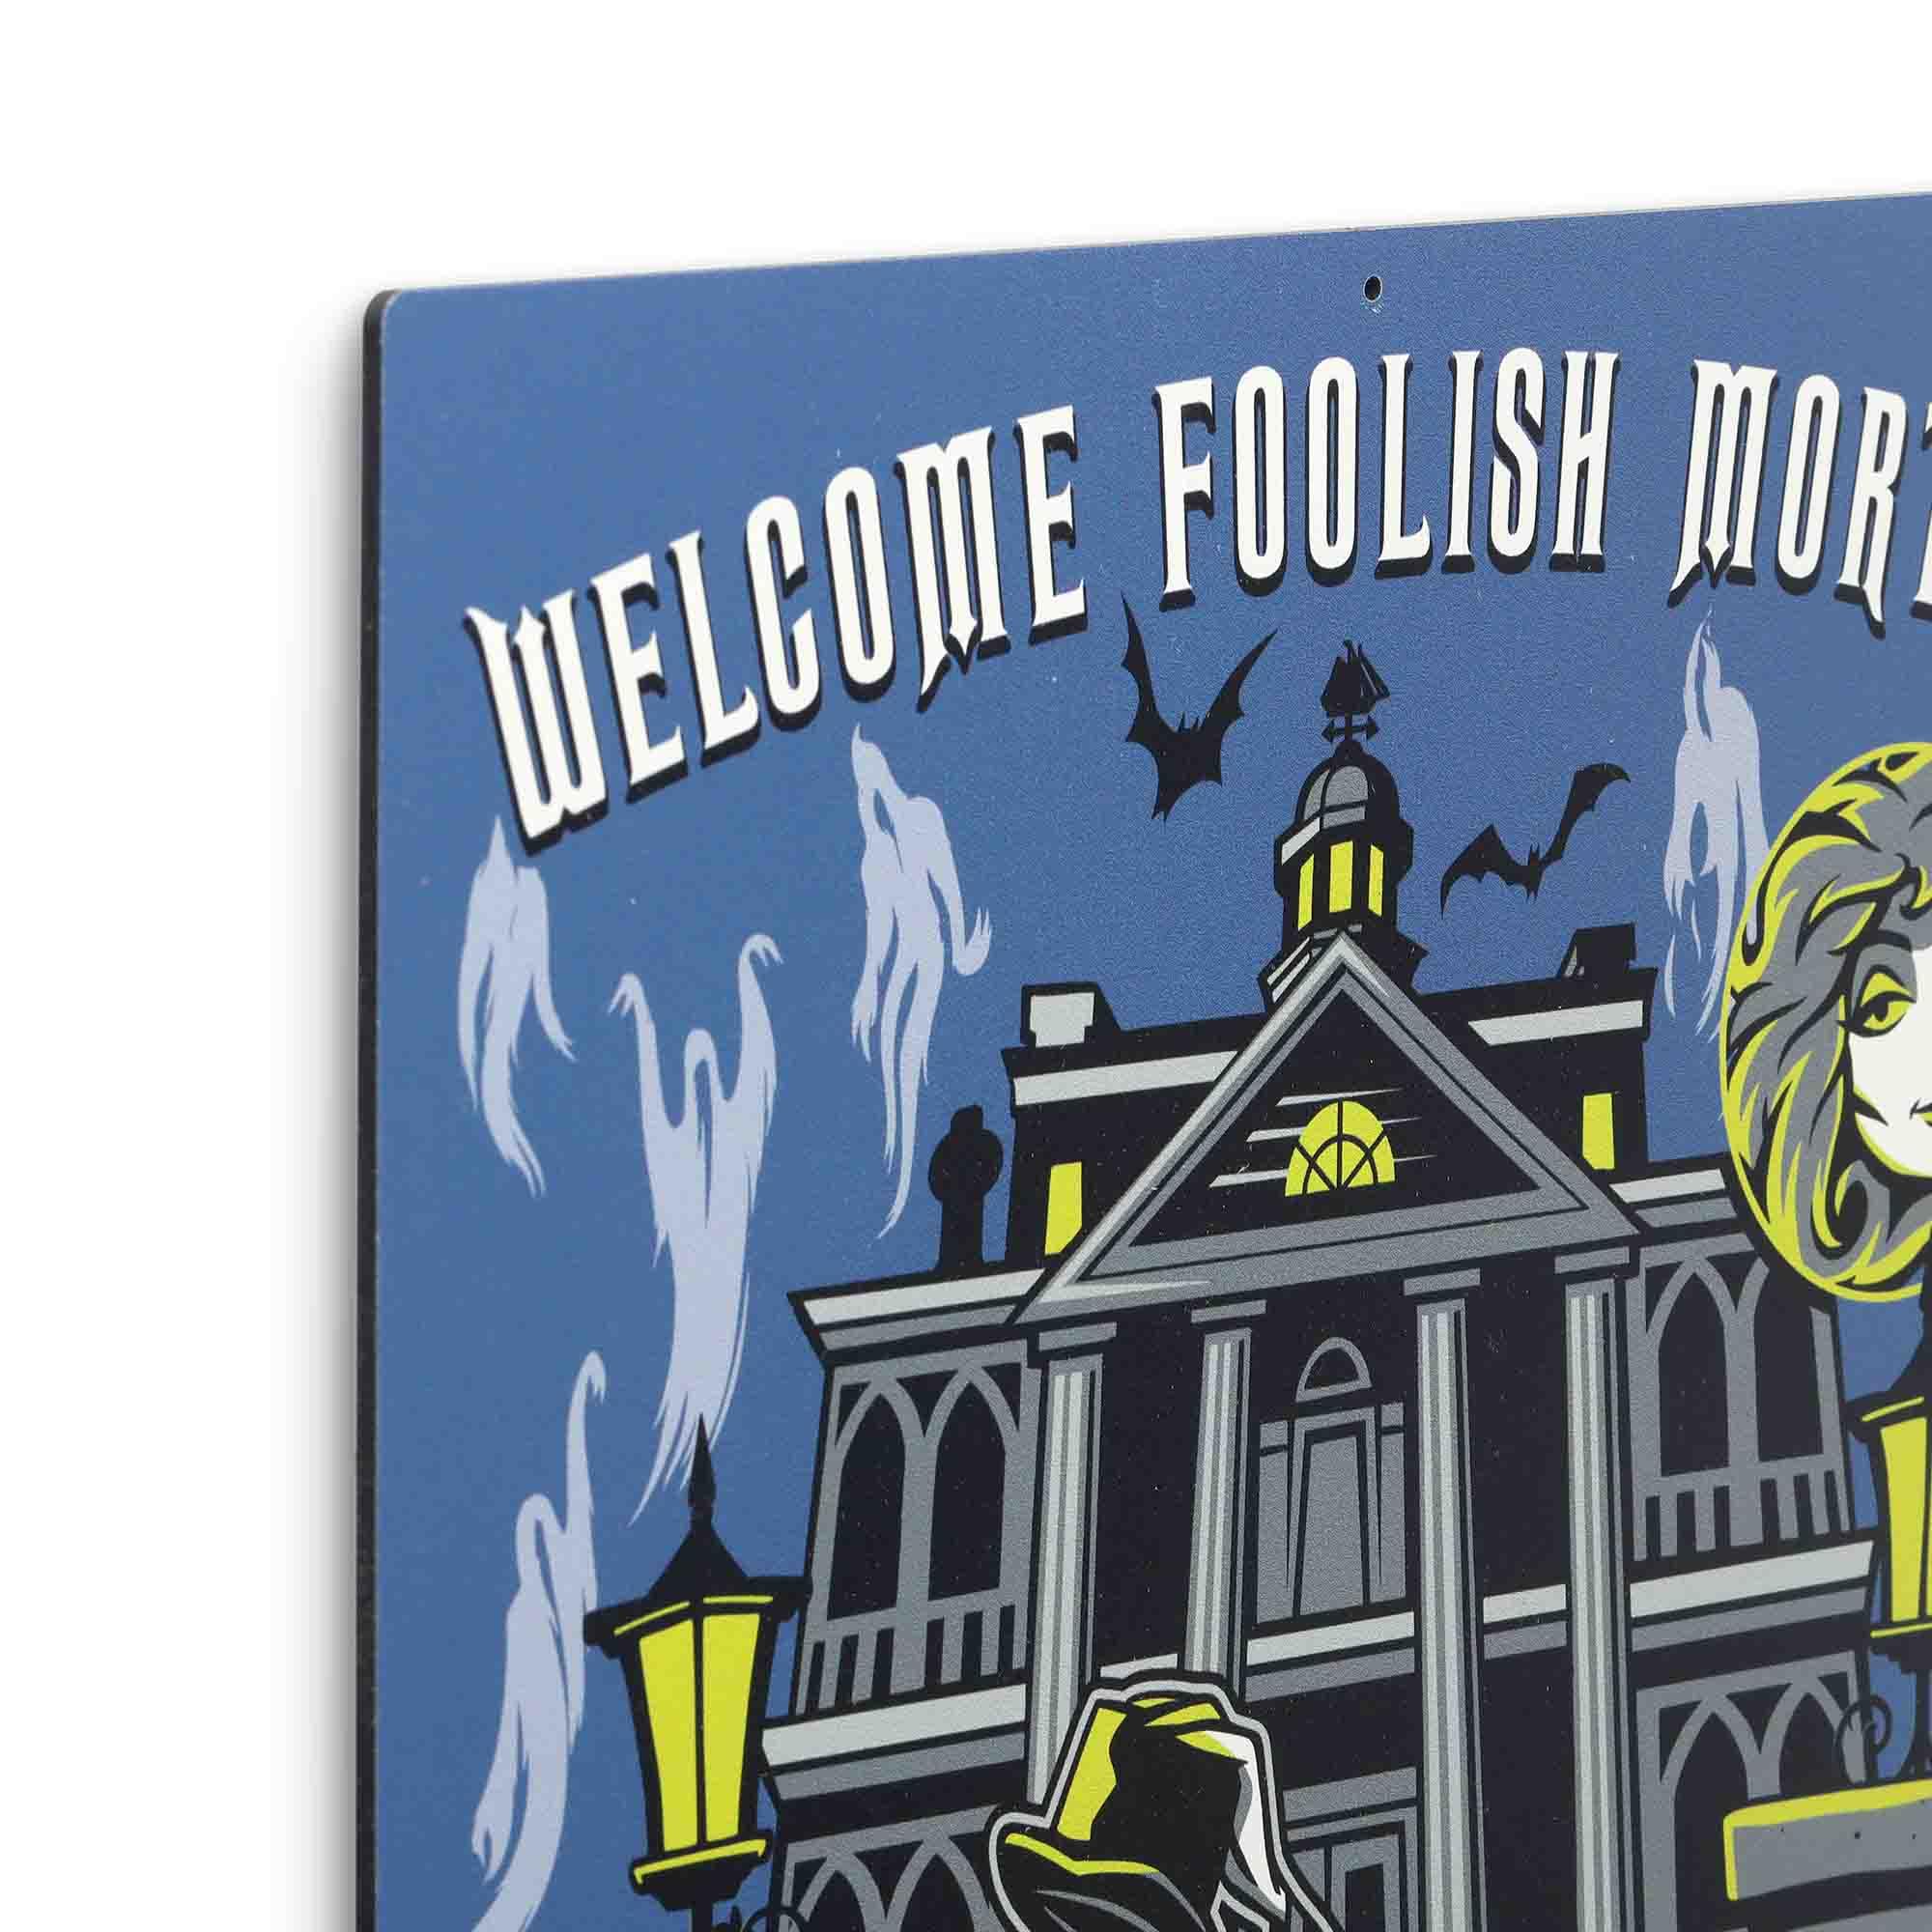 Disney Haunted Mansion Welcome Foolish Mortals Metal Sign - Fun Haunted Mansion Sign for Halloween Decor